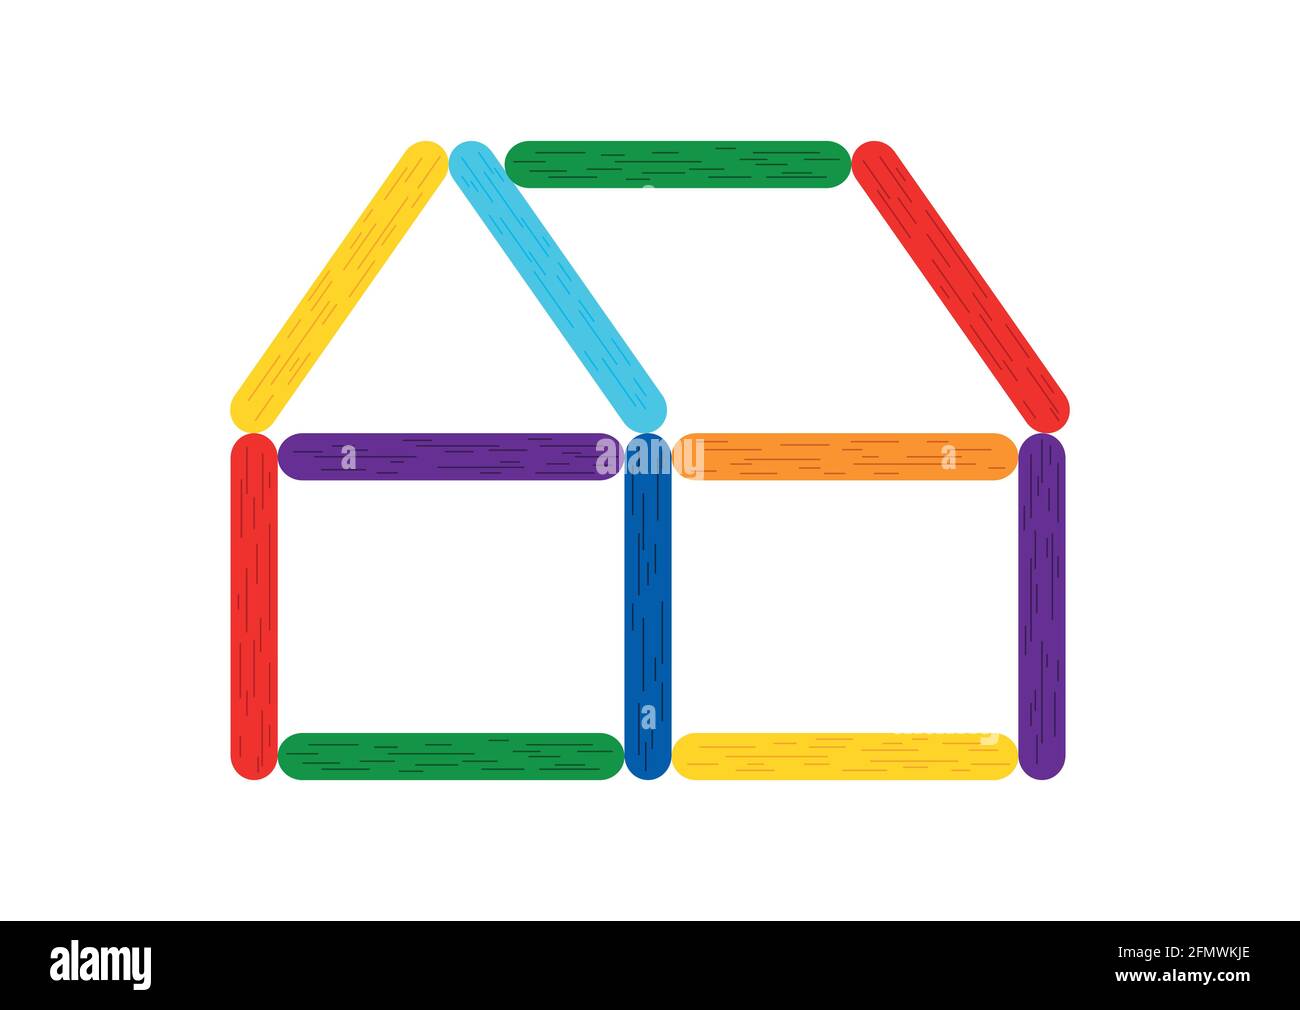 Rainbow color popsicle stick house for kids game. Stock Vector